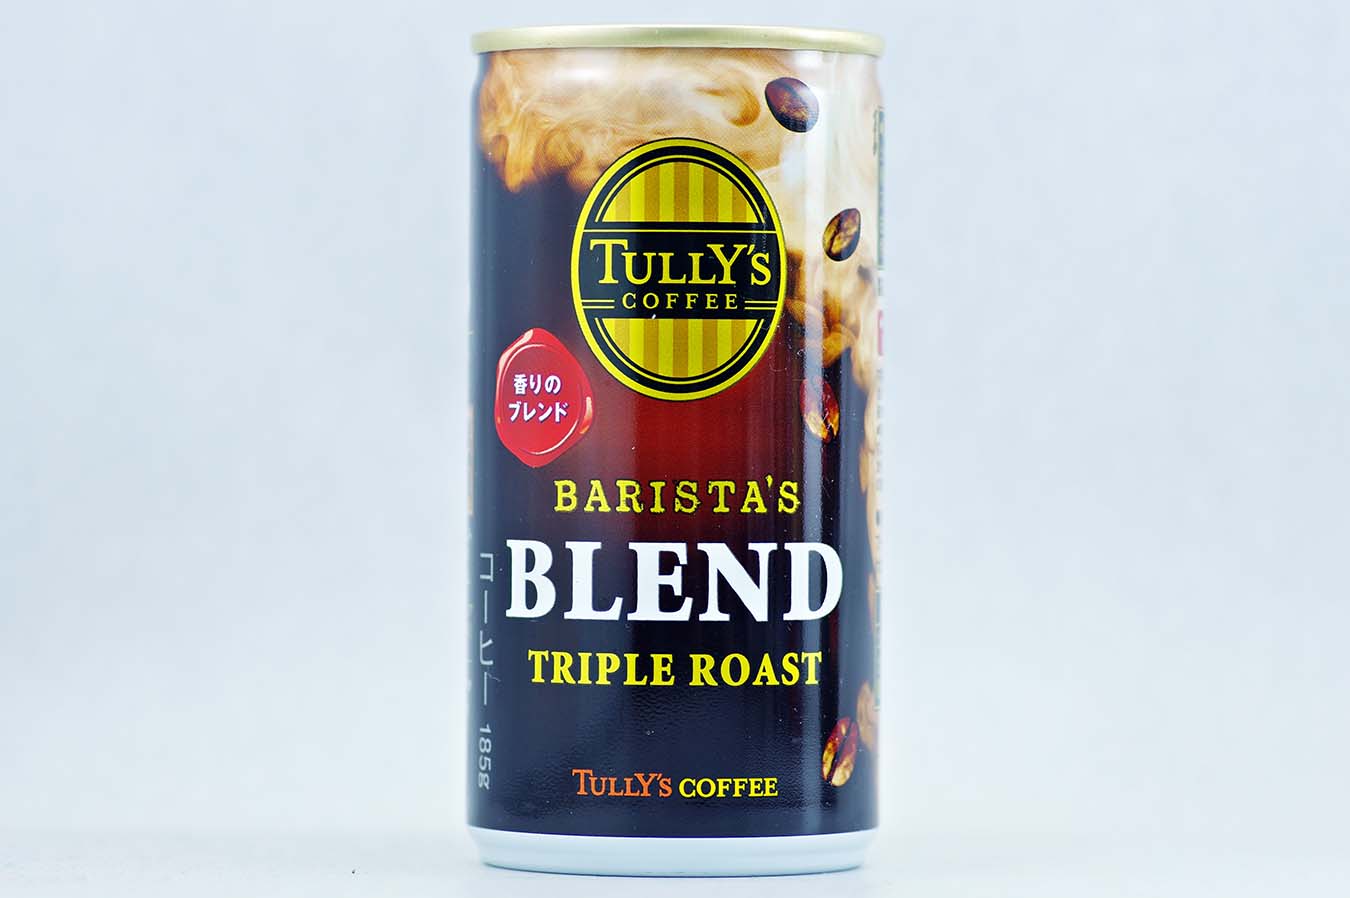 TULLY'S COFFEE BARISTA'S BLEND